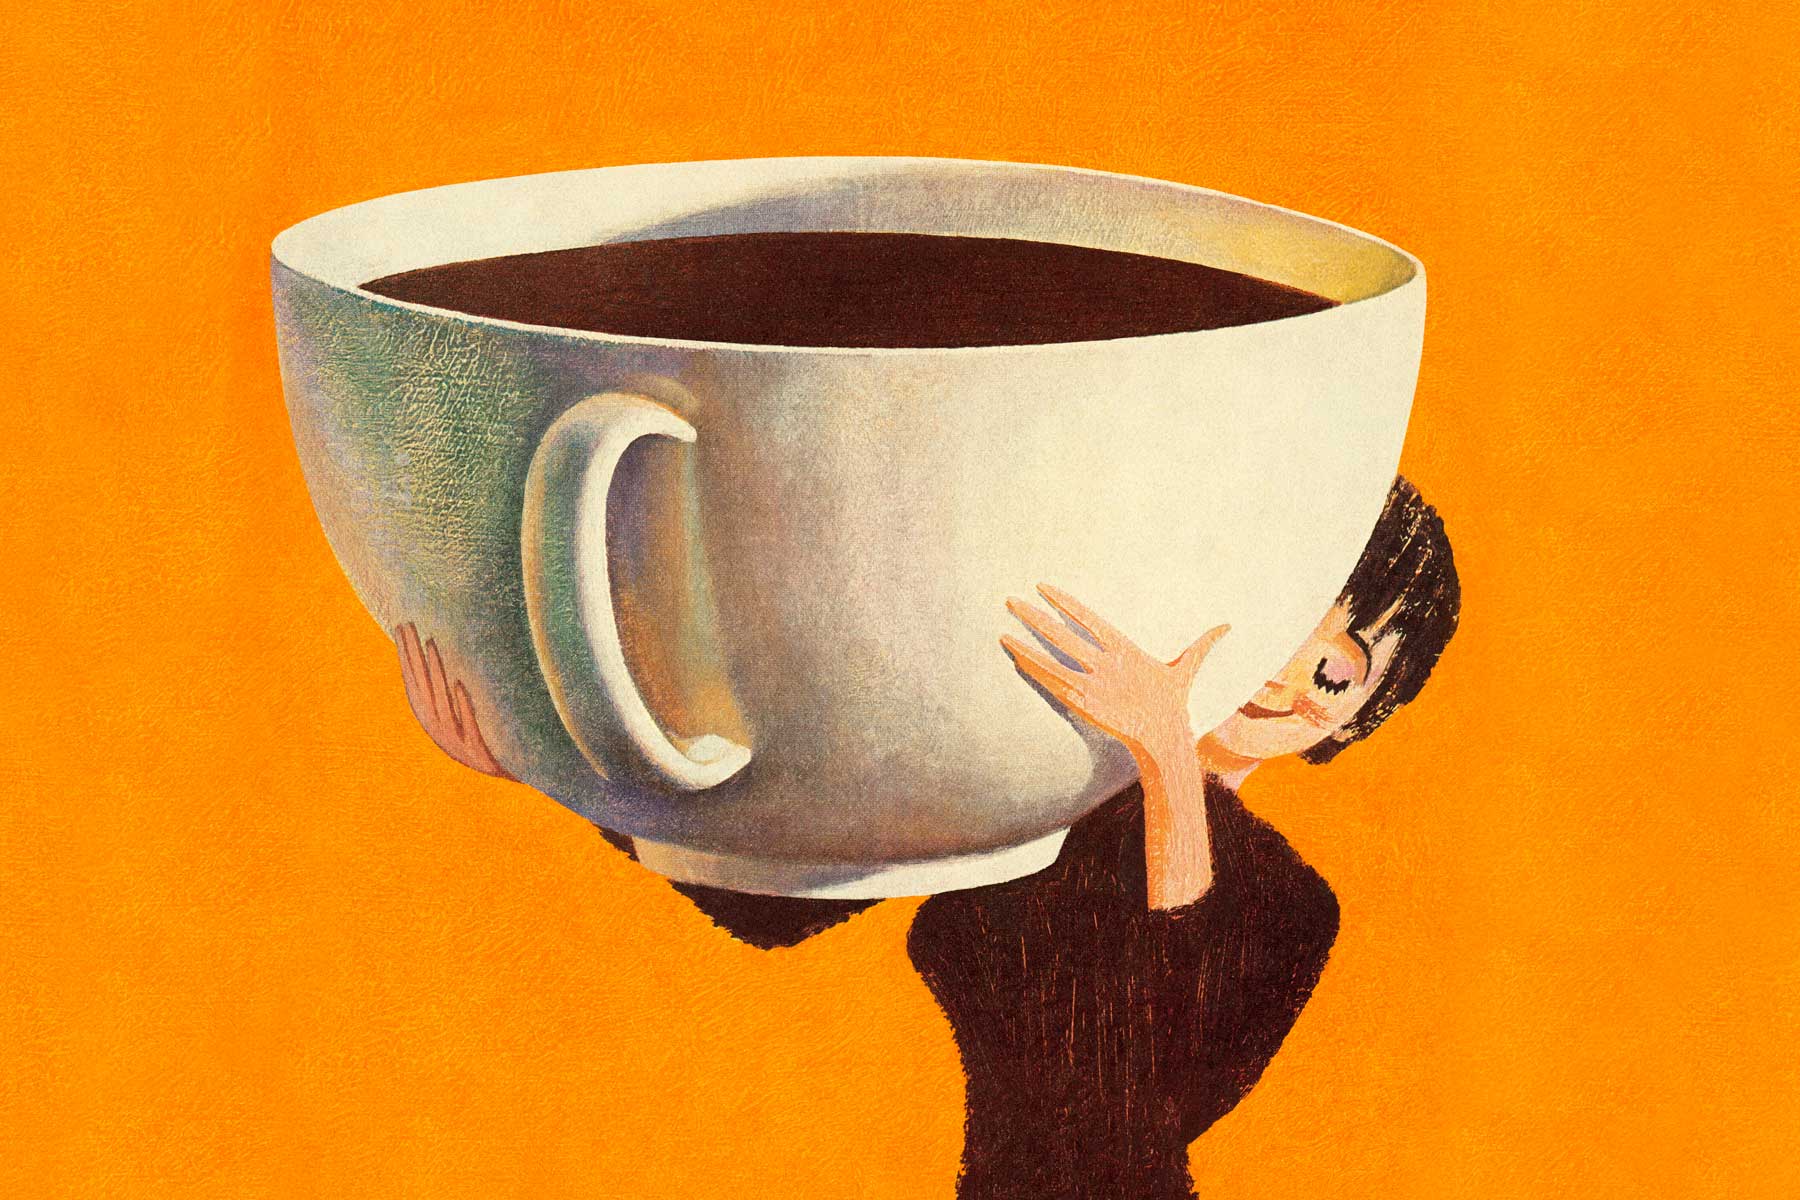 Illustration of woman holding giant cup of coffee